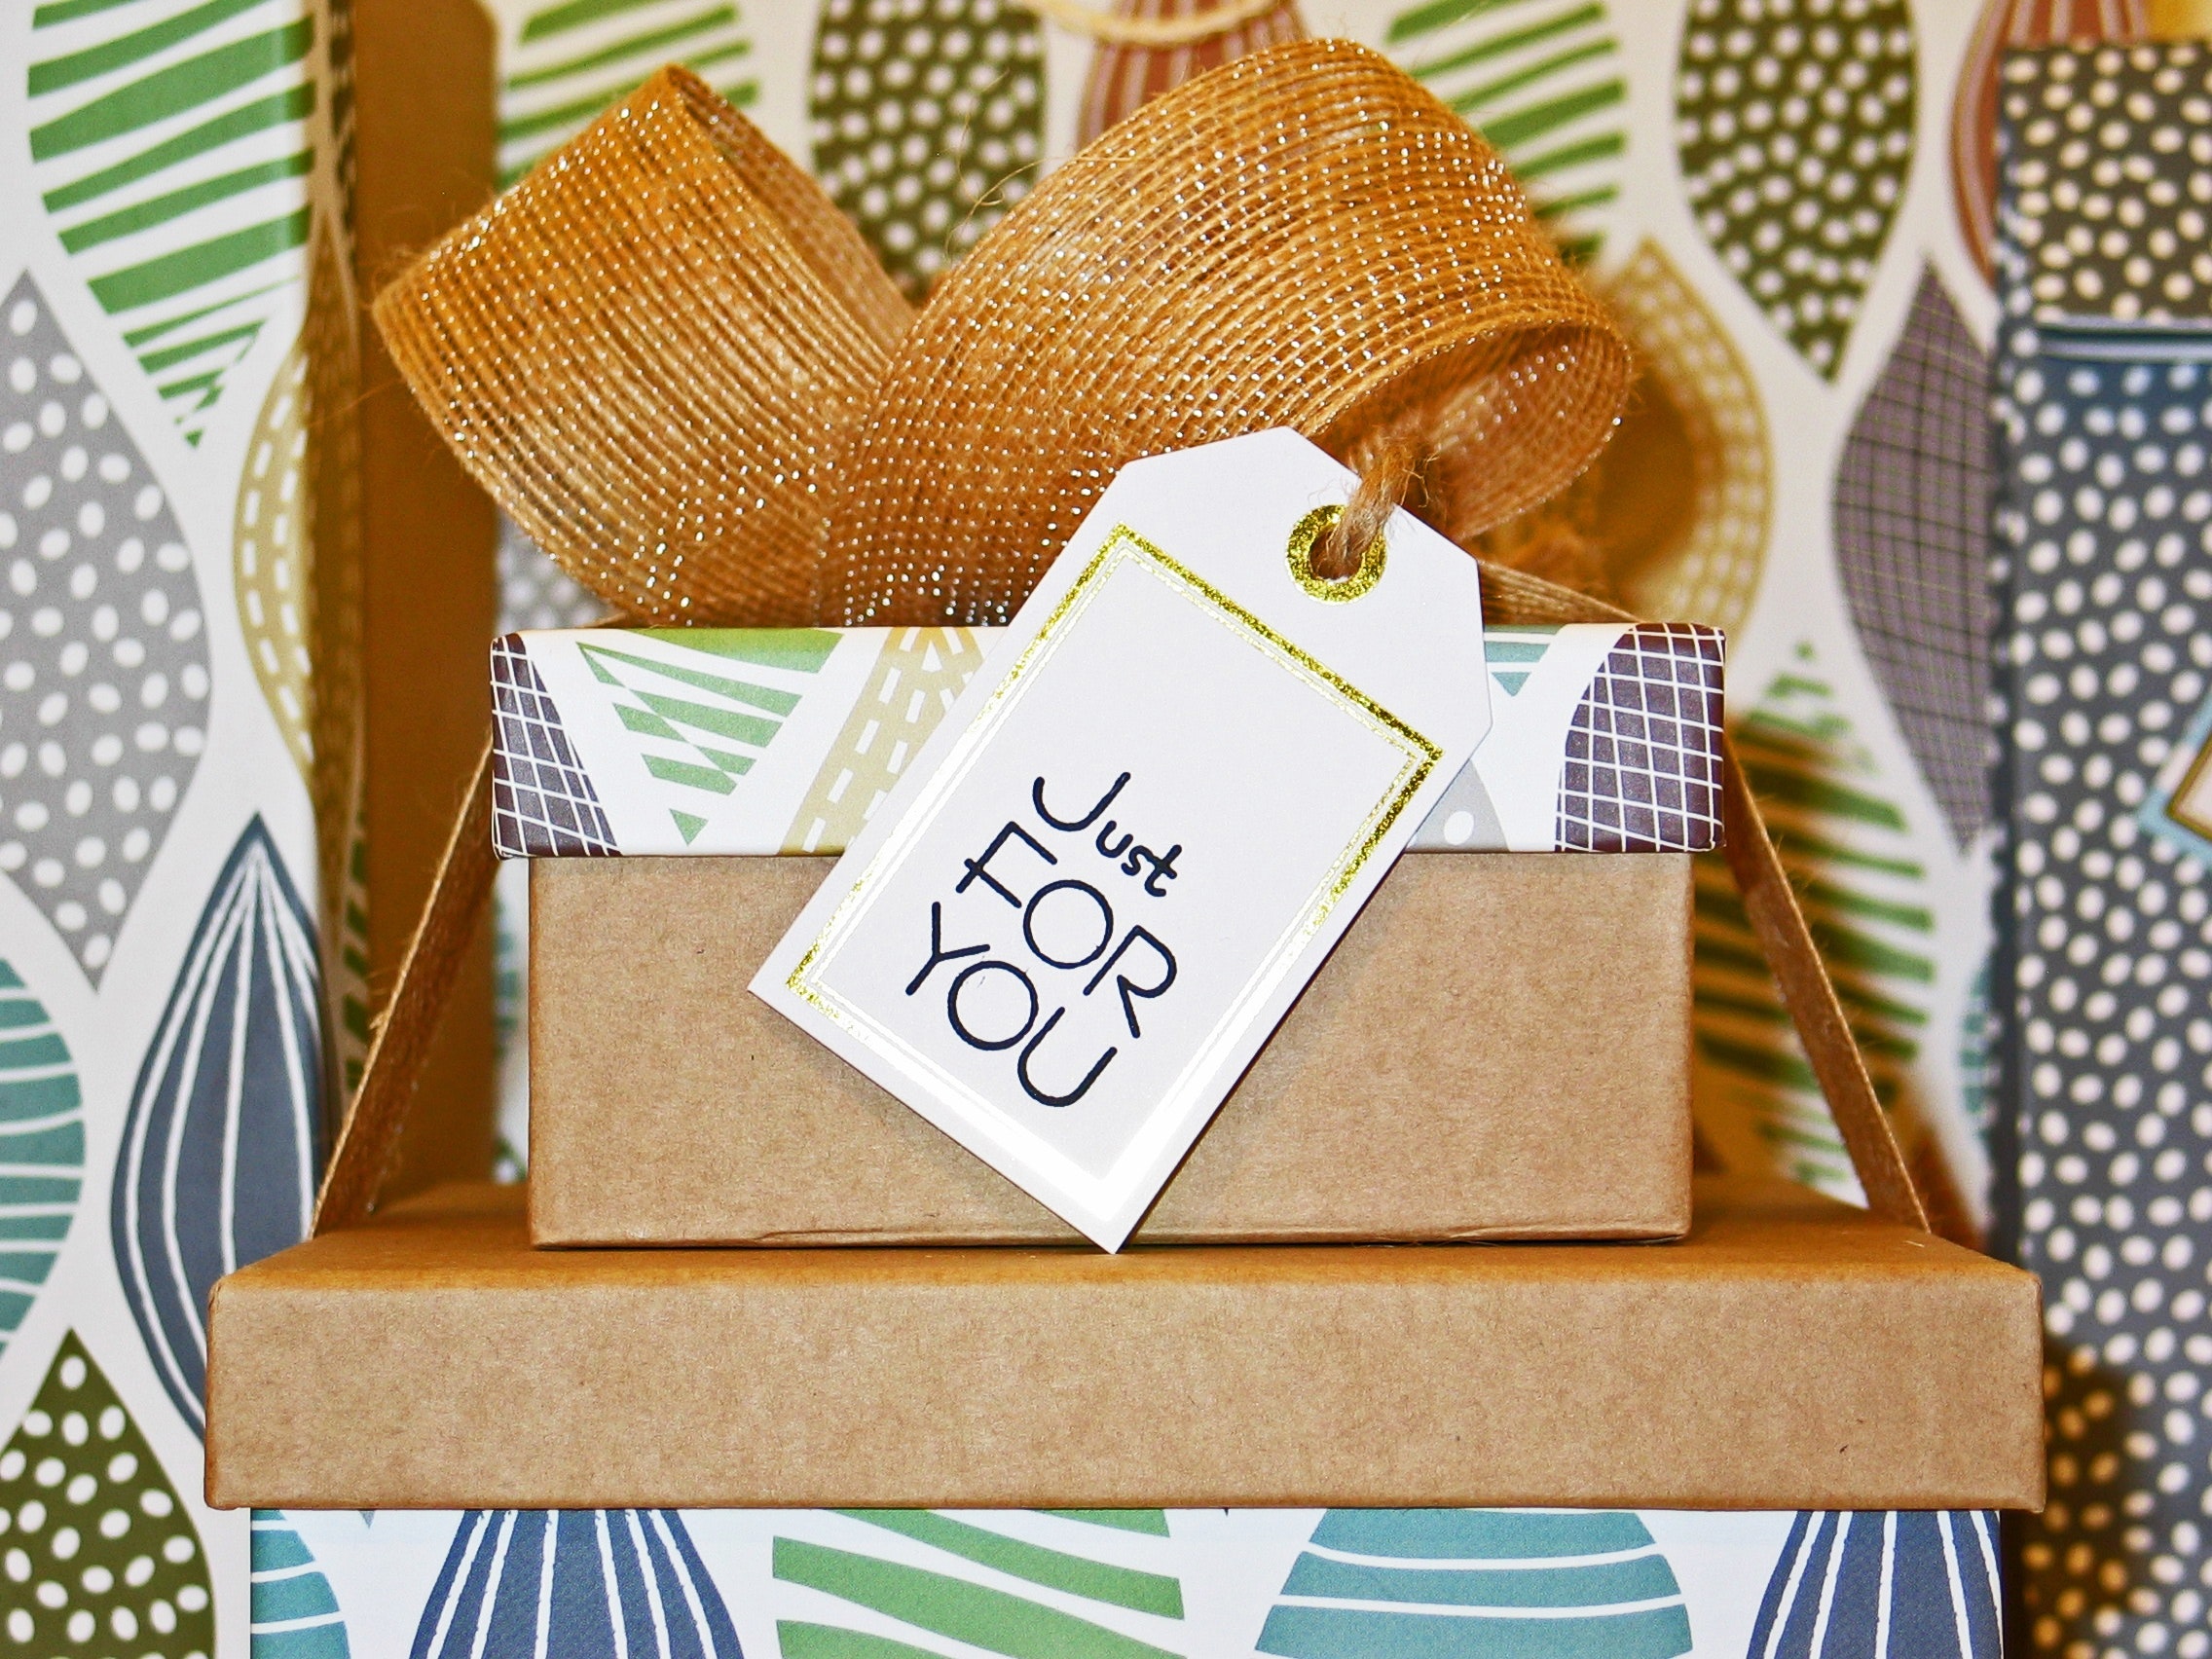 How to Market Your Subscription Box Business